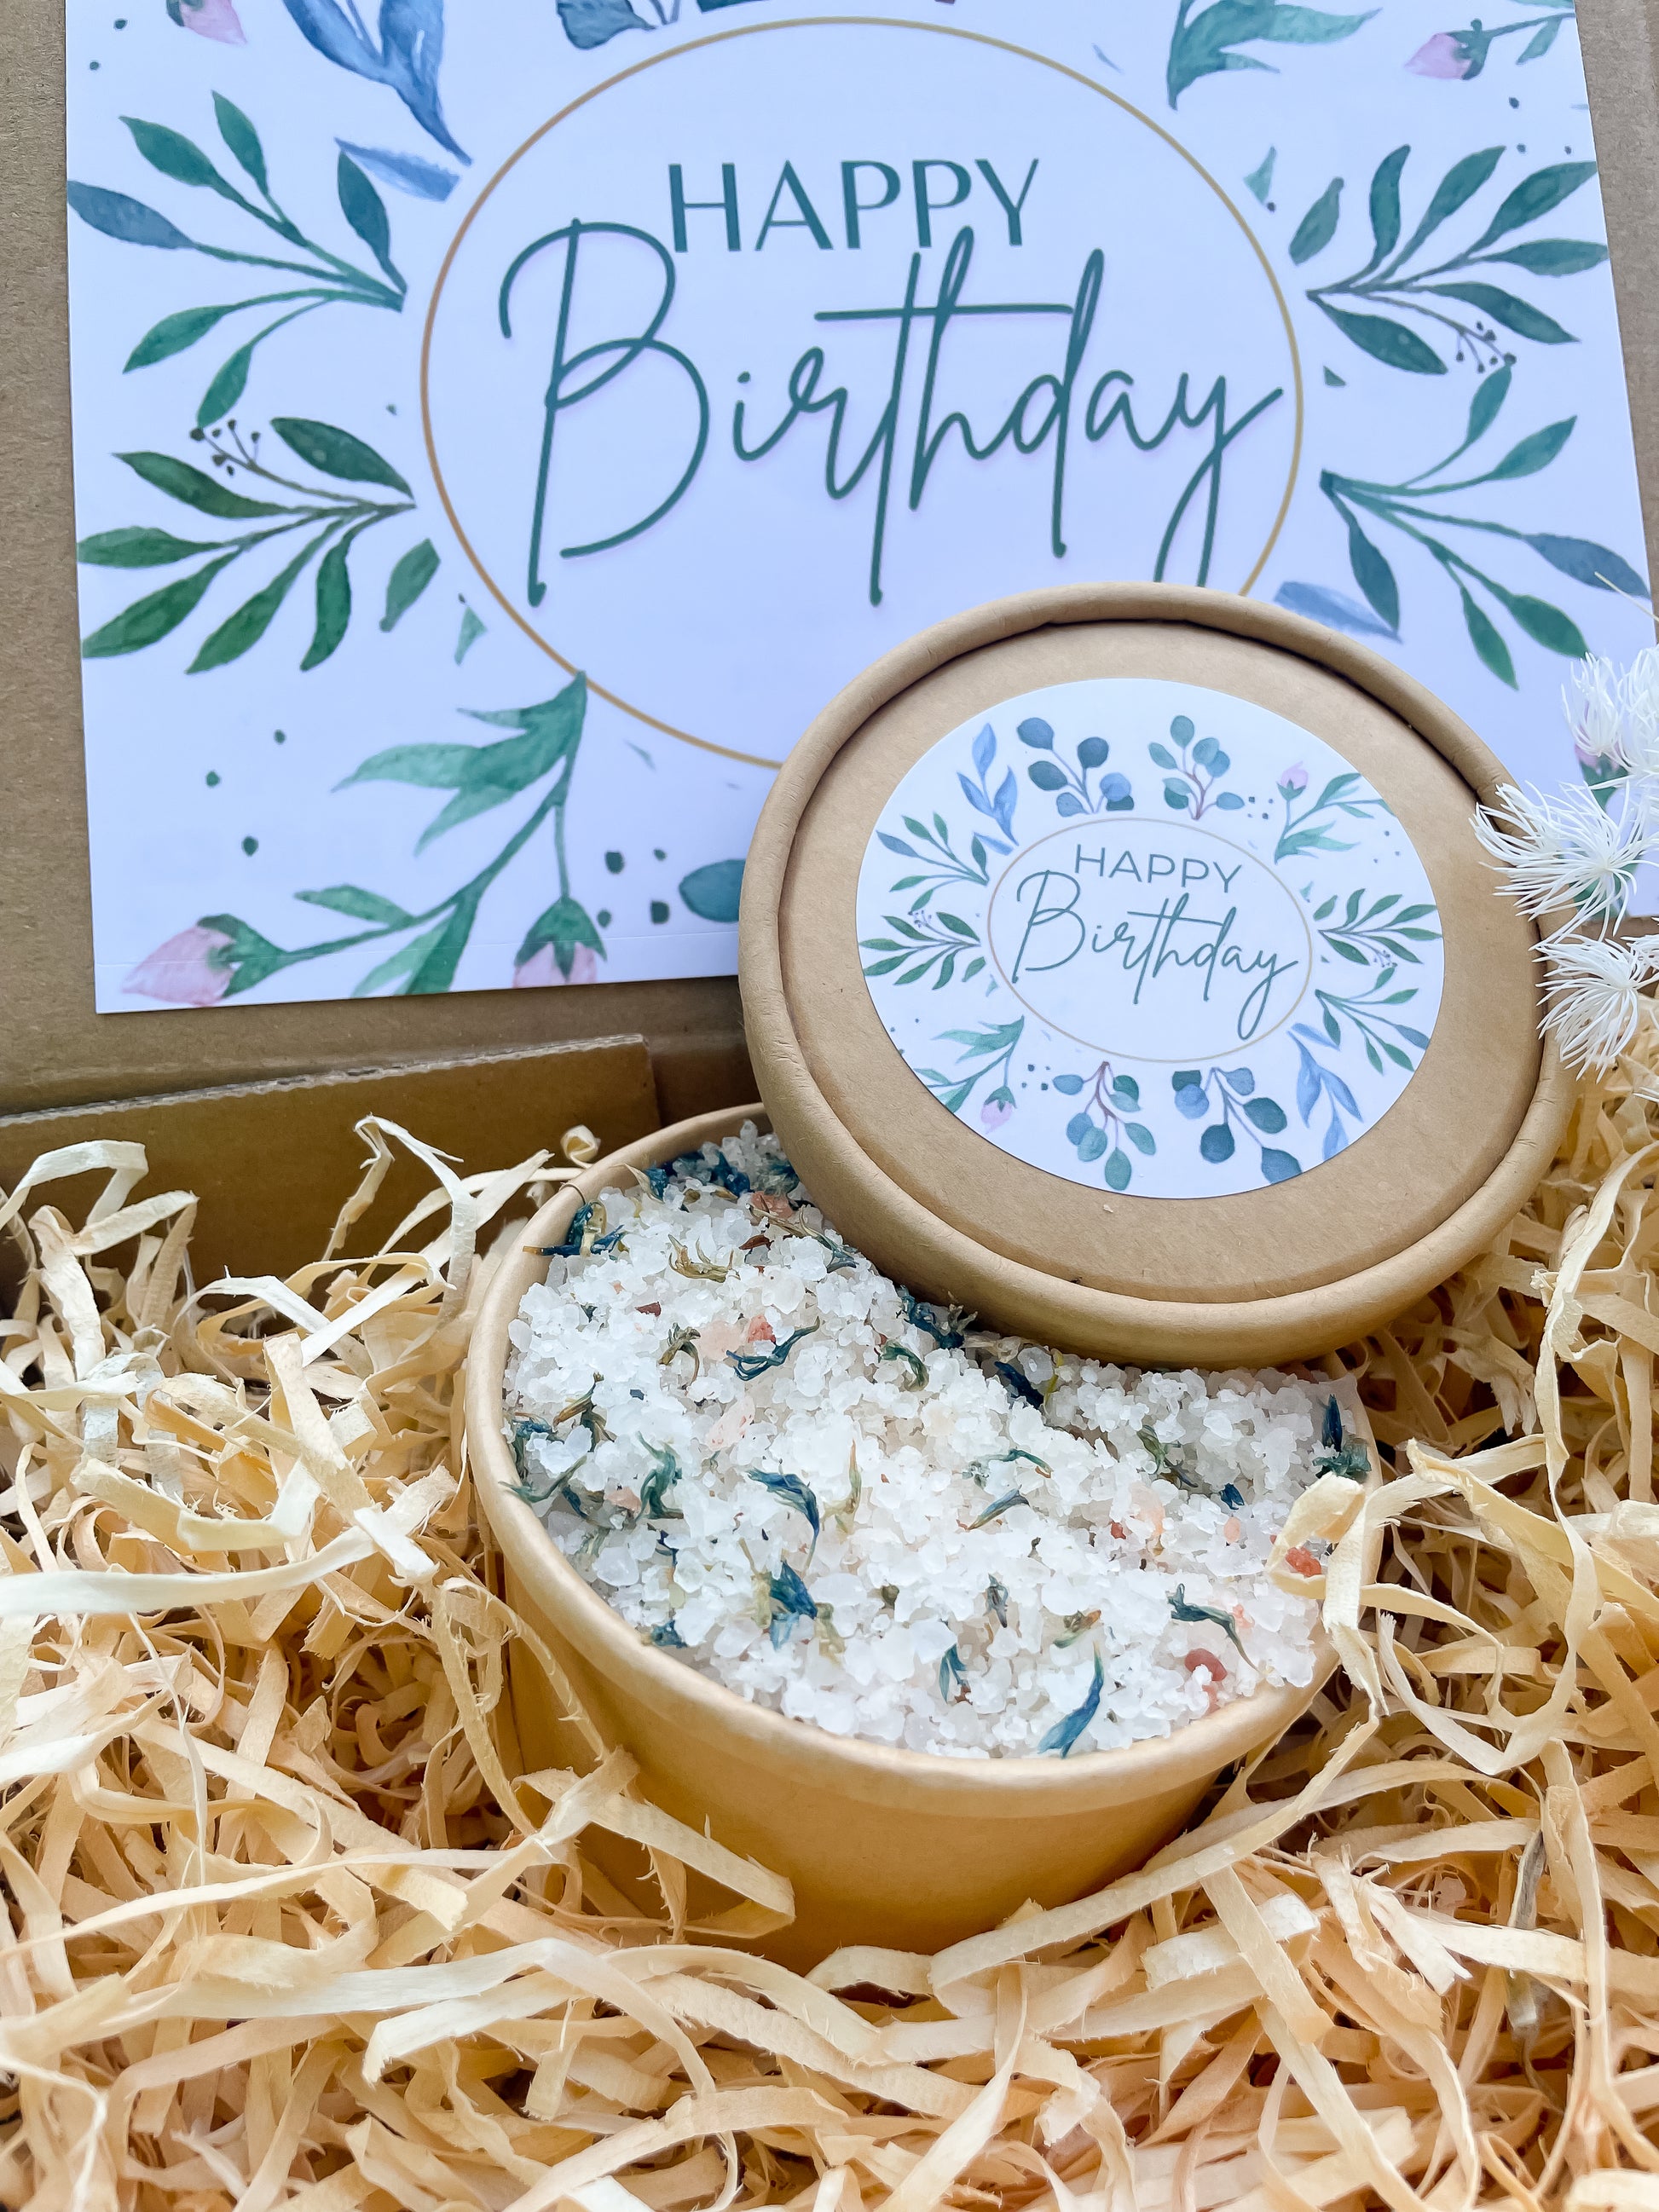 Birthday gift boxes, Birthday gift boxes Australia, Birthday gift boxes Brisbane, Birthday gift boxes for her, Birthday gift hamper Brisbane, Birthday gift hamper,  Birthday pamper pack for her, birthday care package, care package